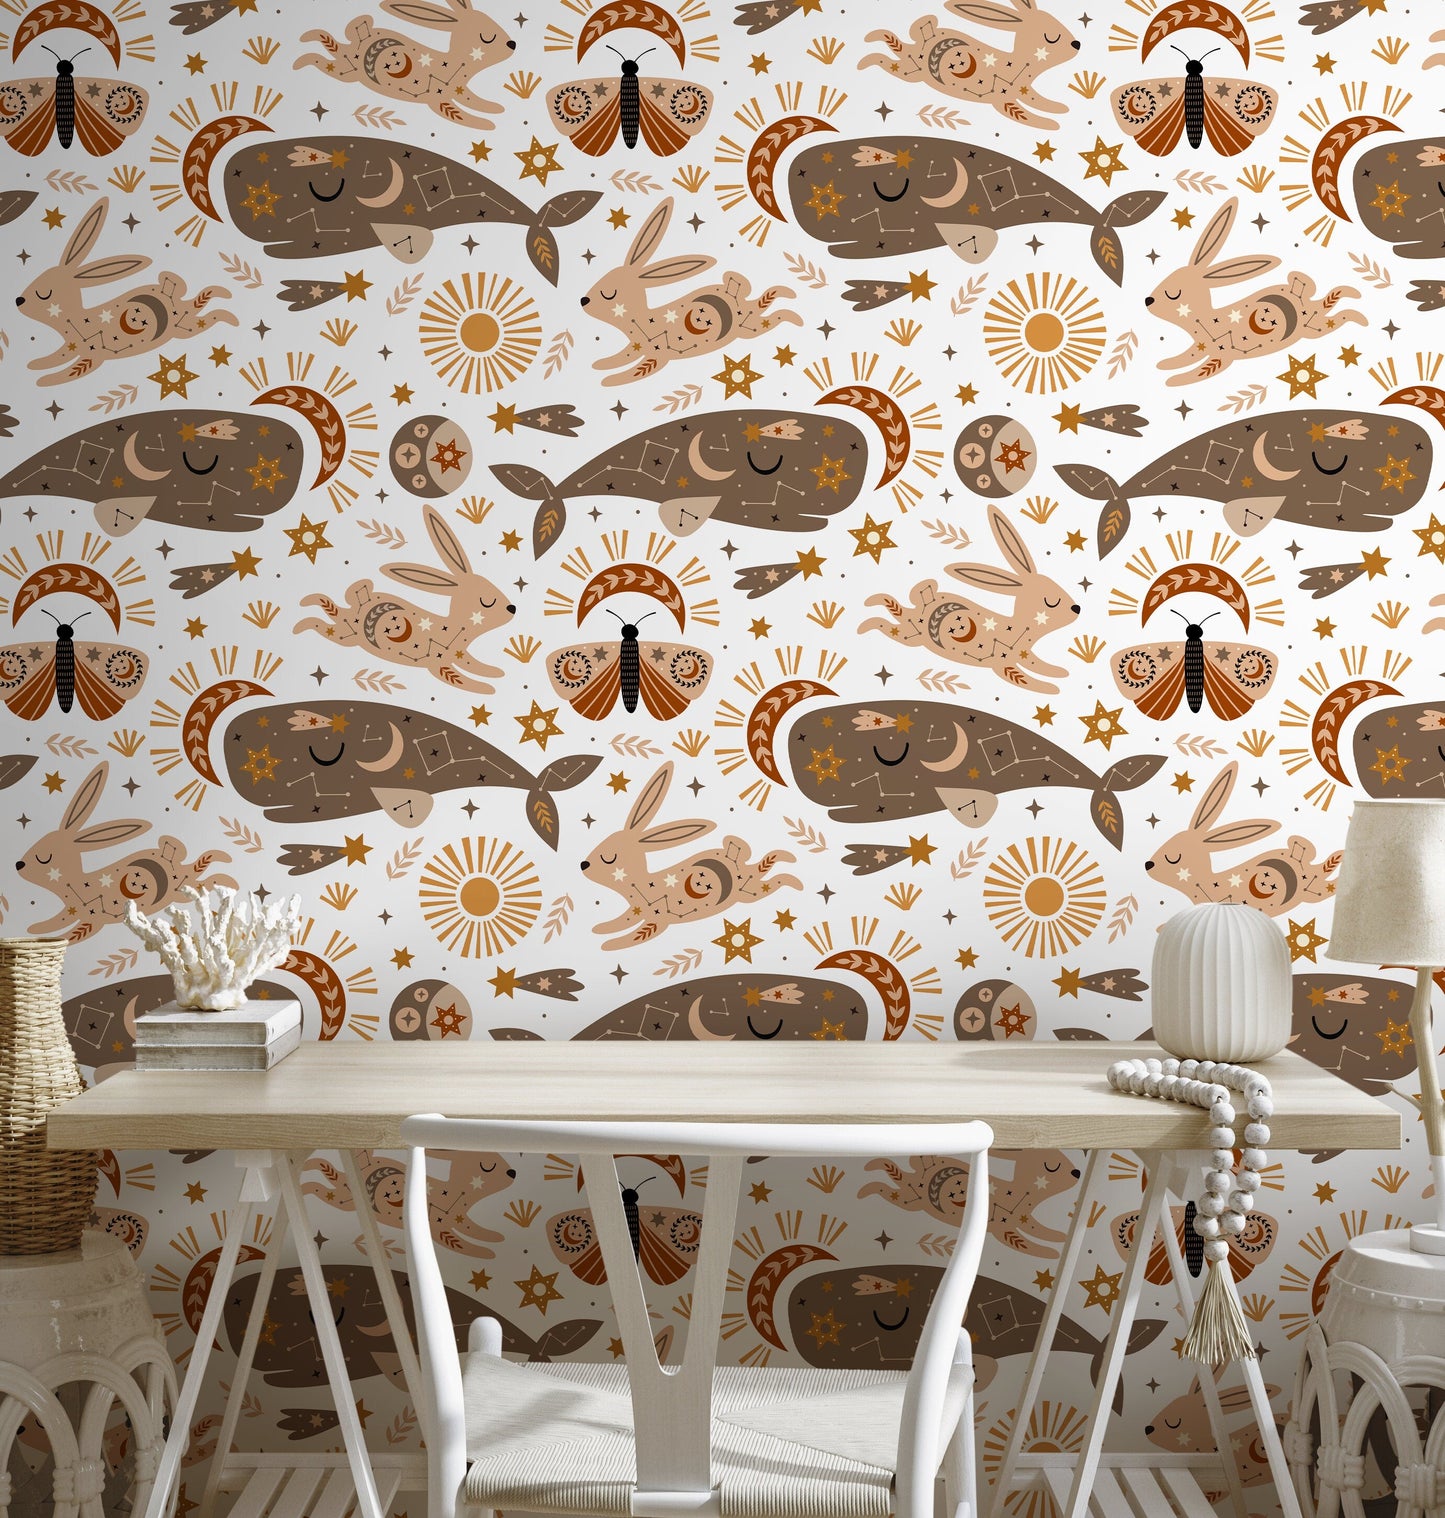 Mystique and Celestial Wallpaper Removable Peel and Stick Wallpaper, Peel and Stick Wallpaper Rabbit and Whale - ZACO